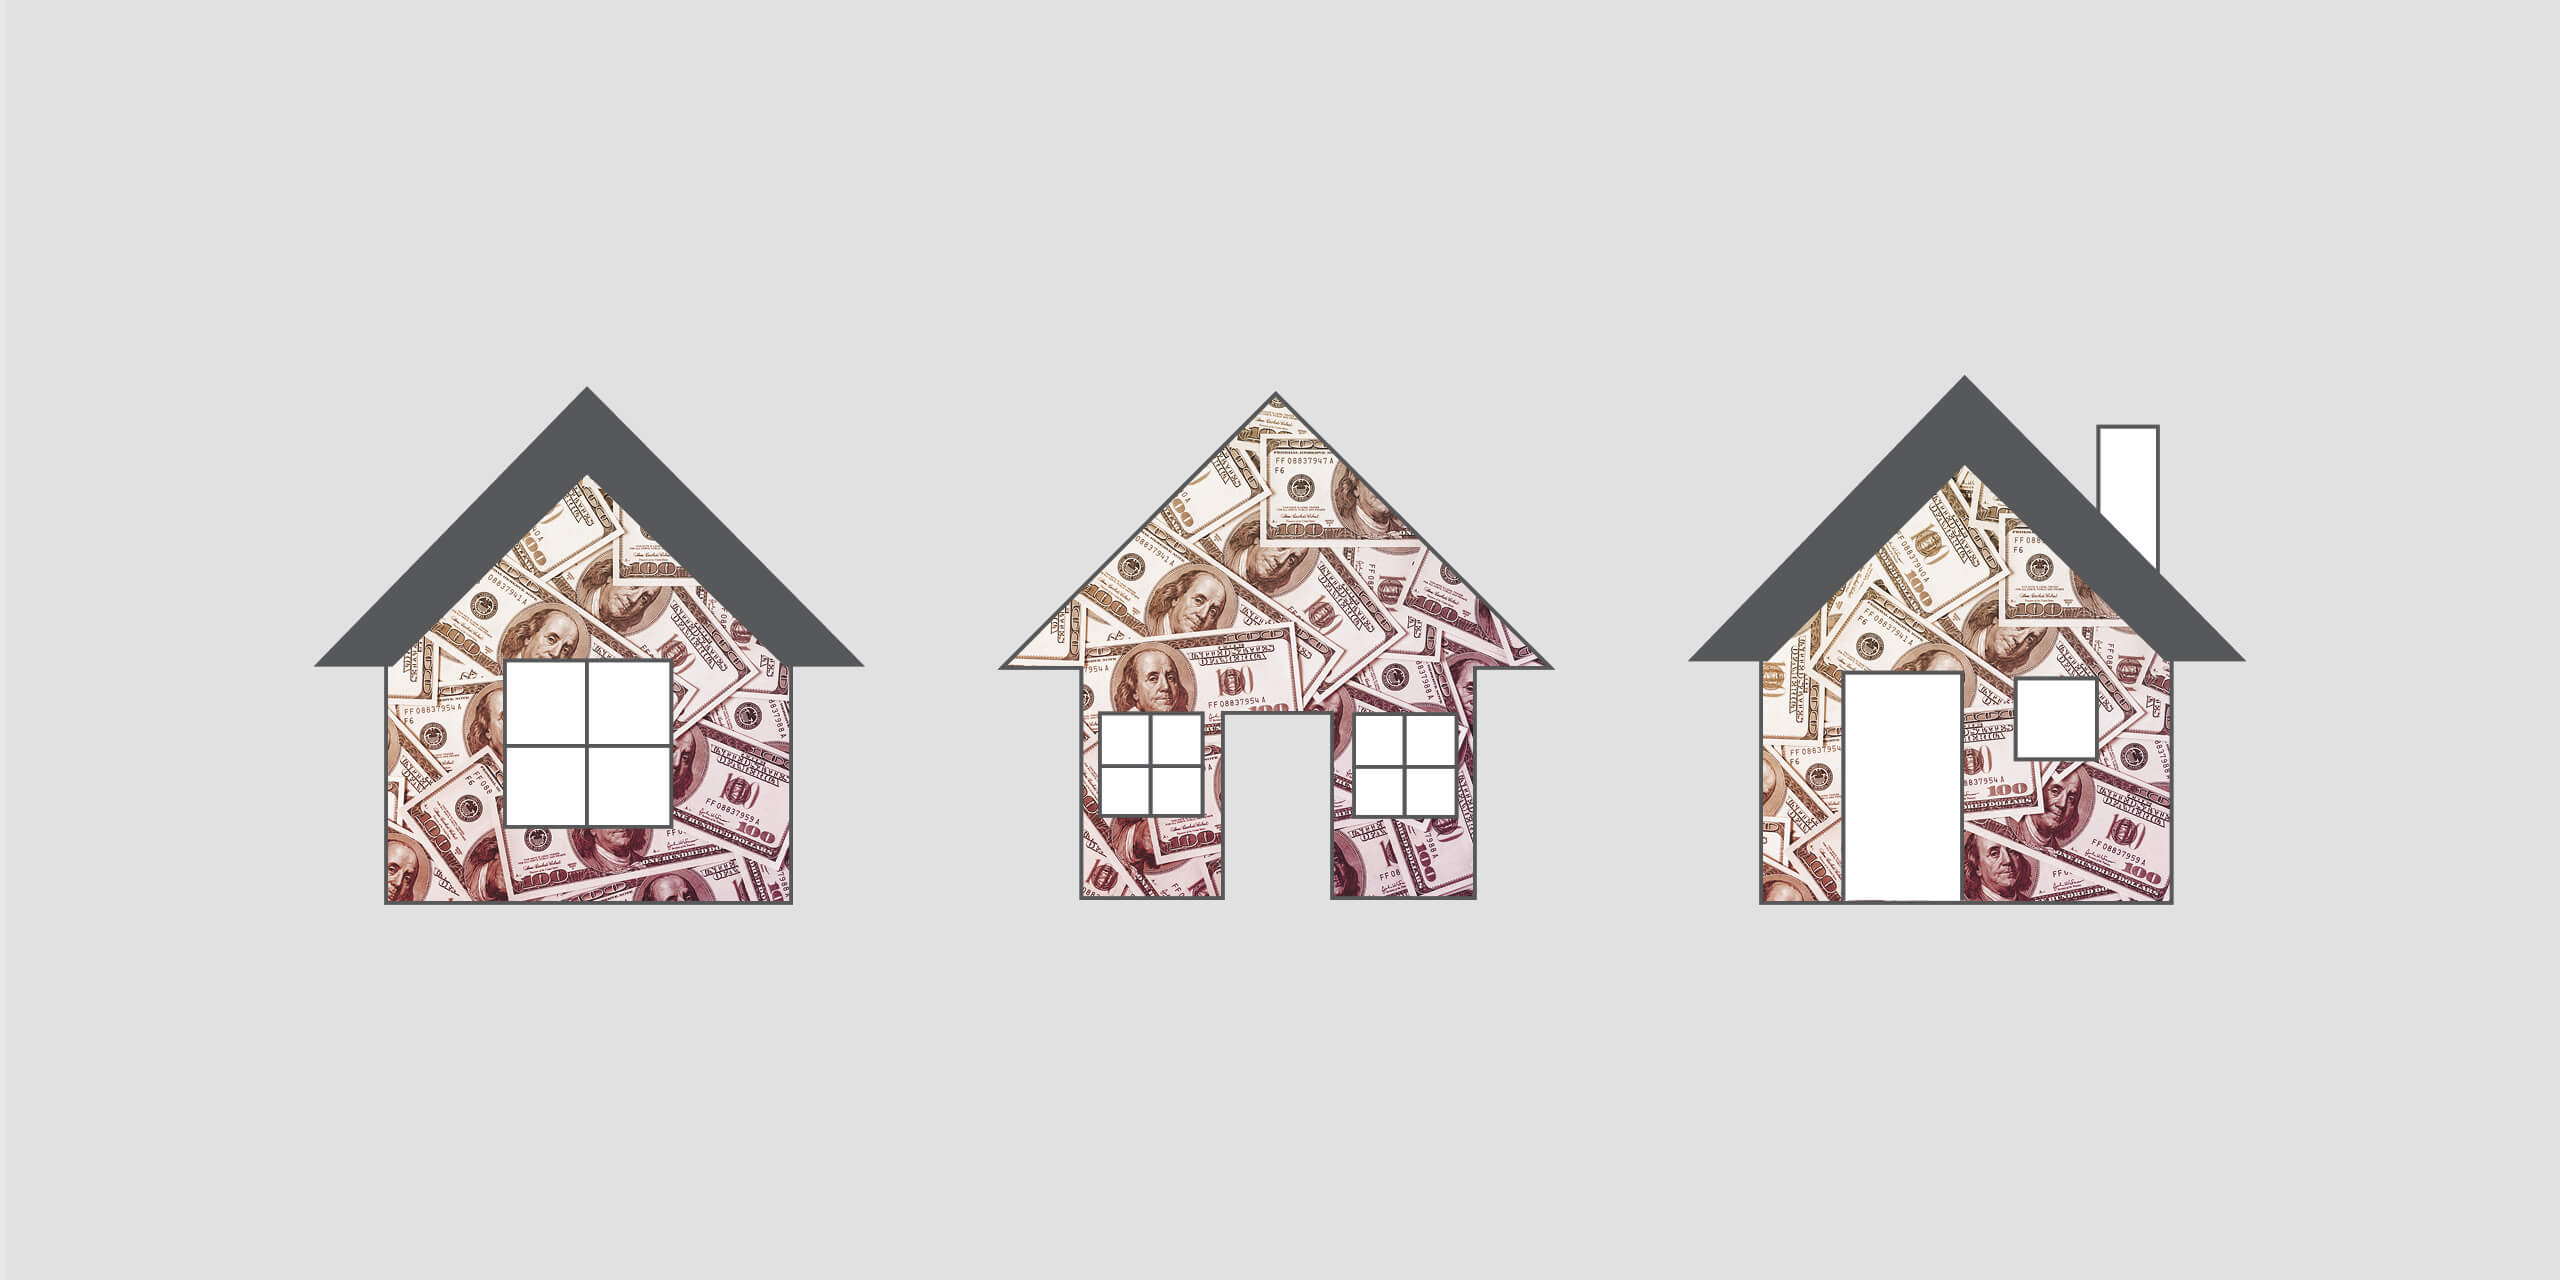 Home illustrations filled with $100 bill pattern